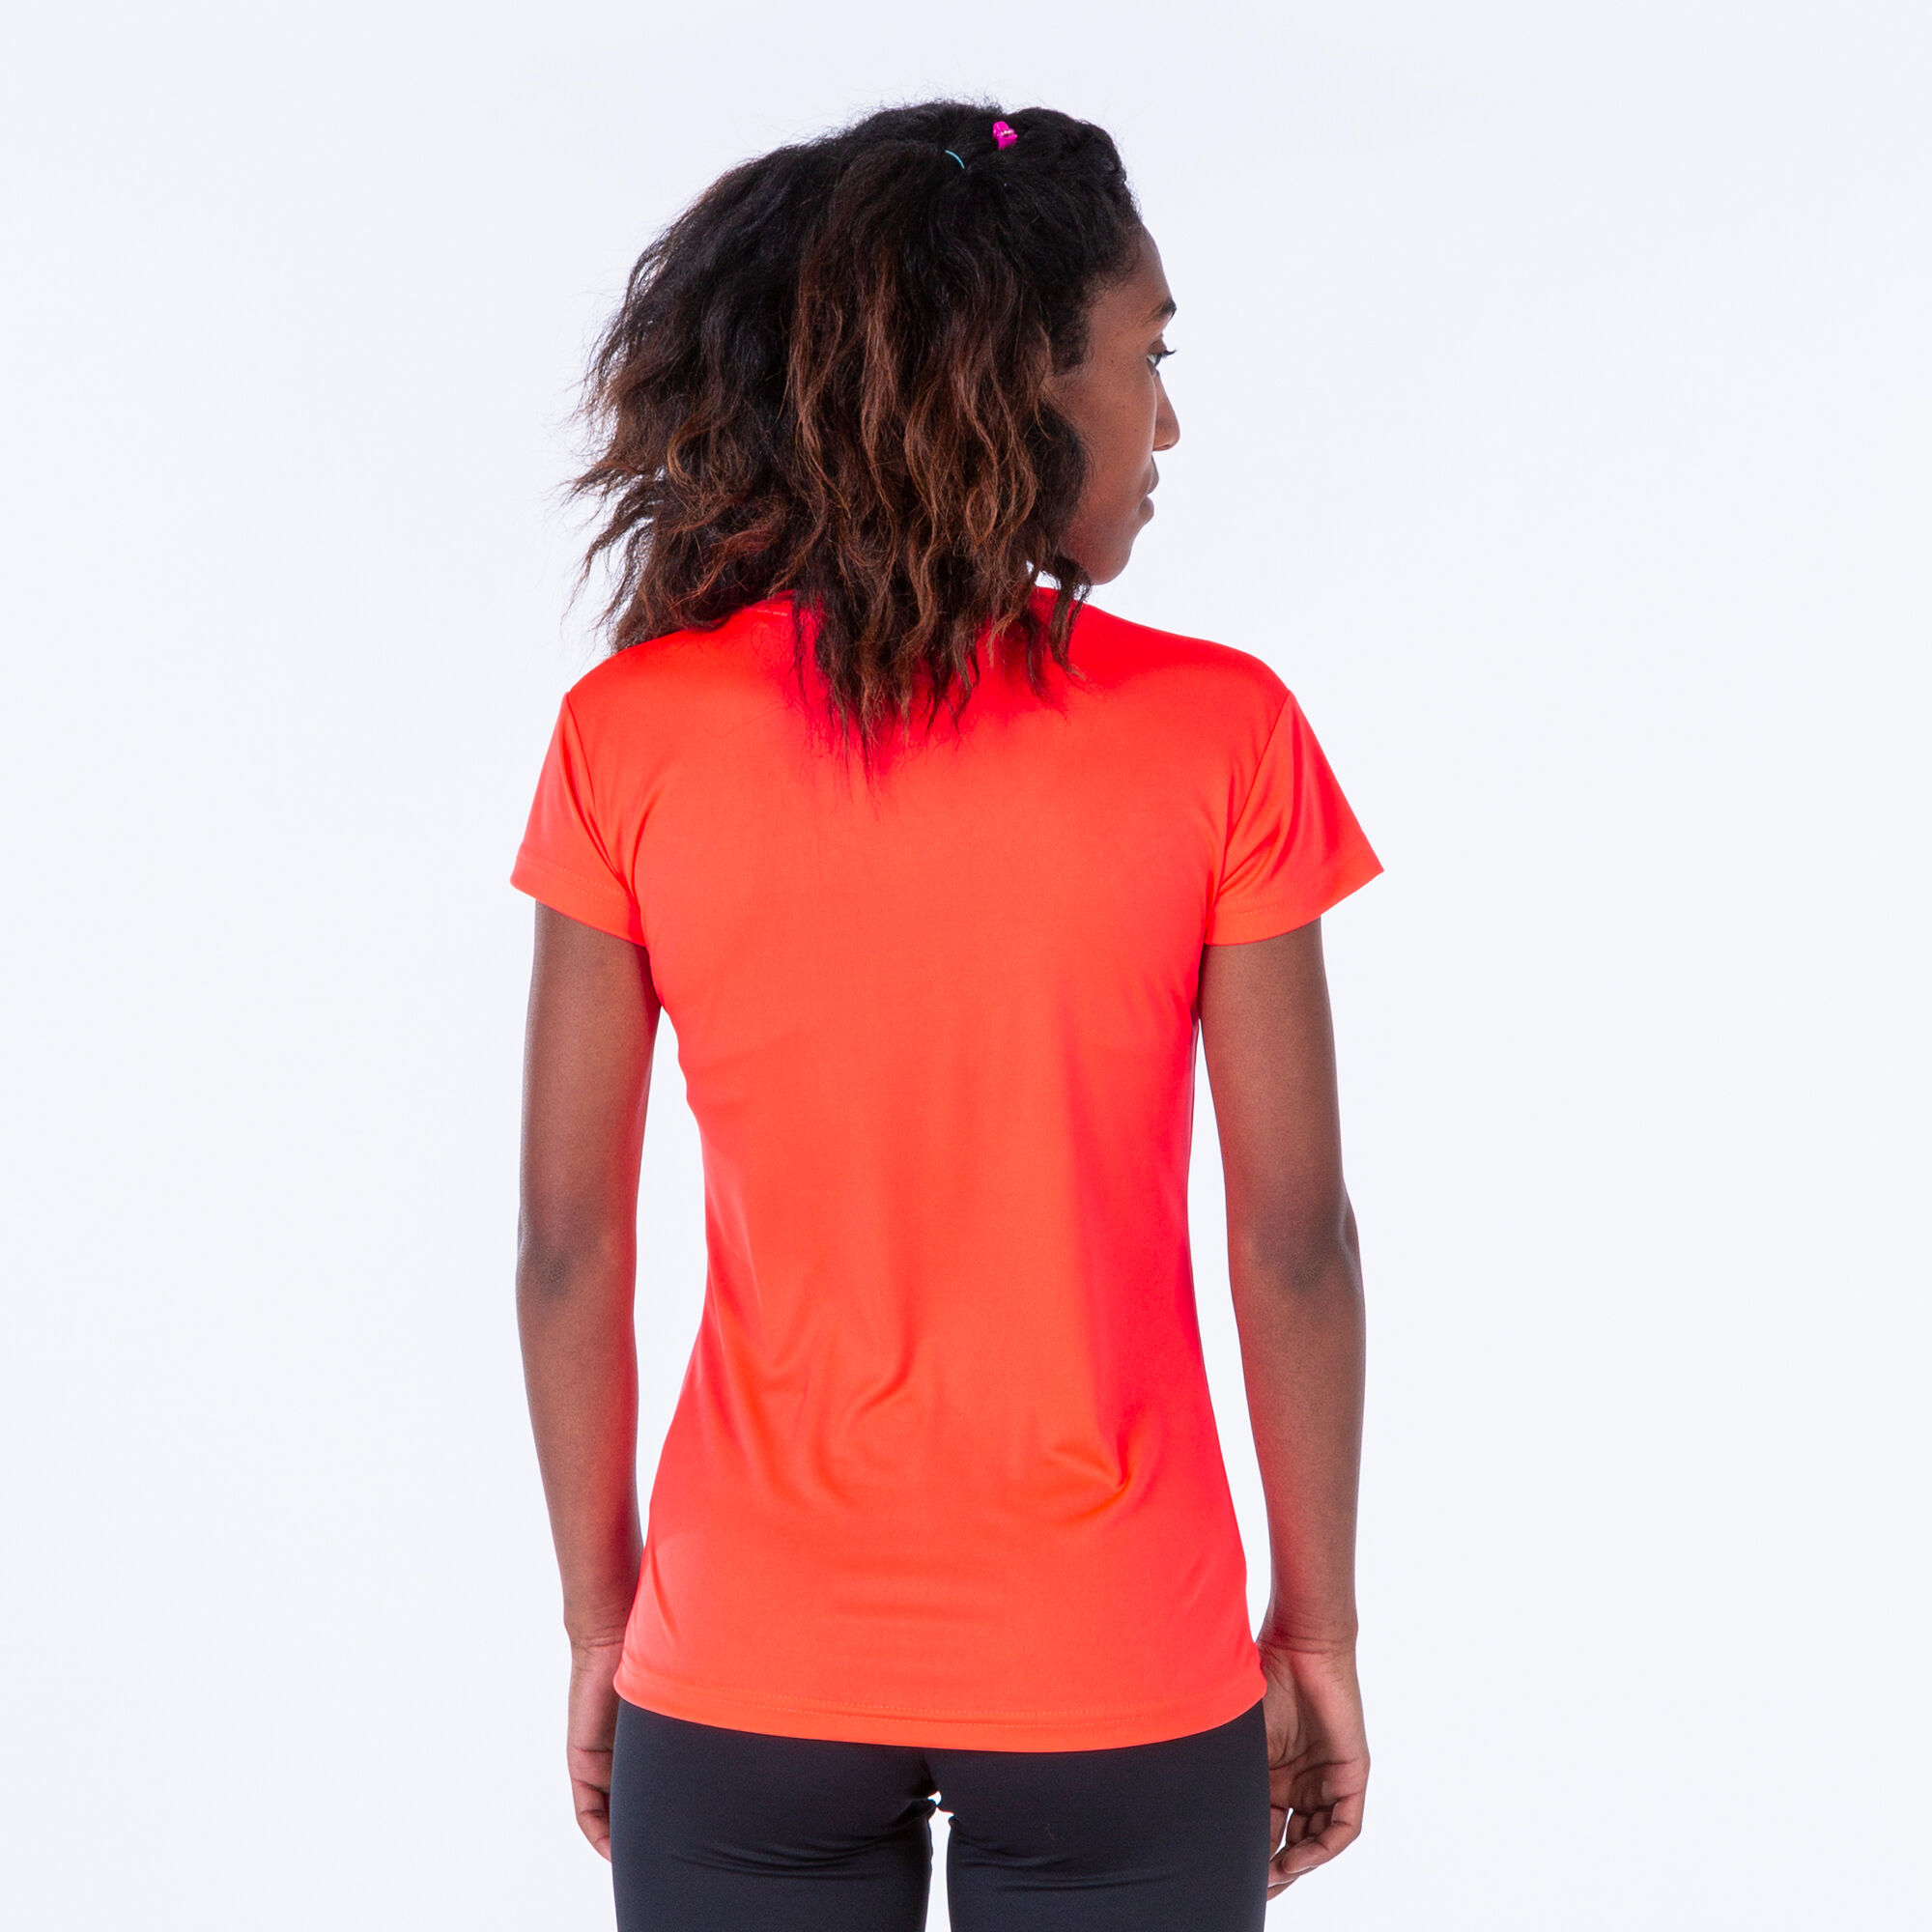 Maillot manches courtes femme Record II corail fluo